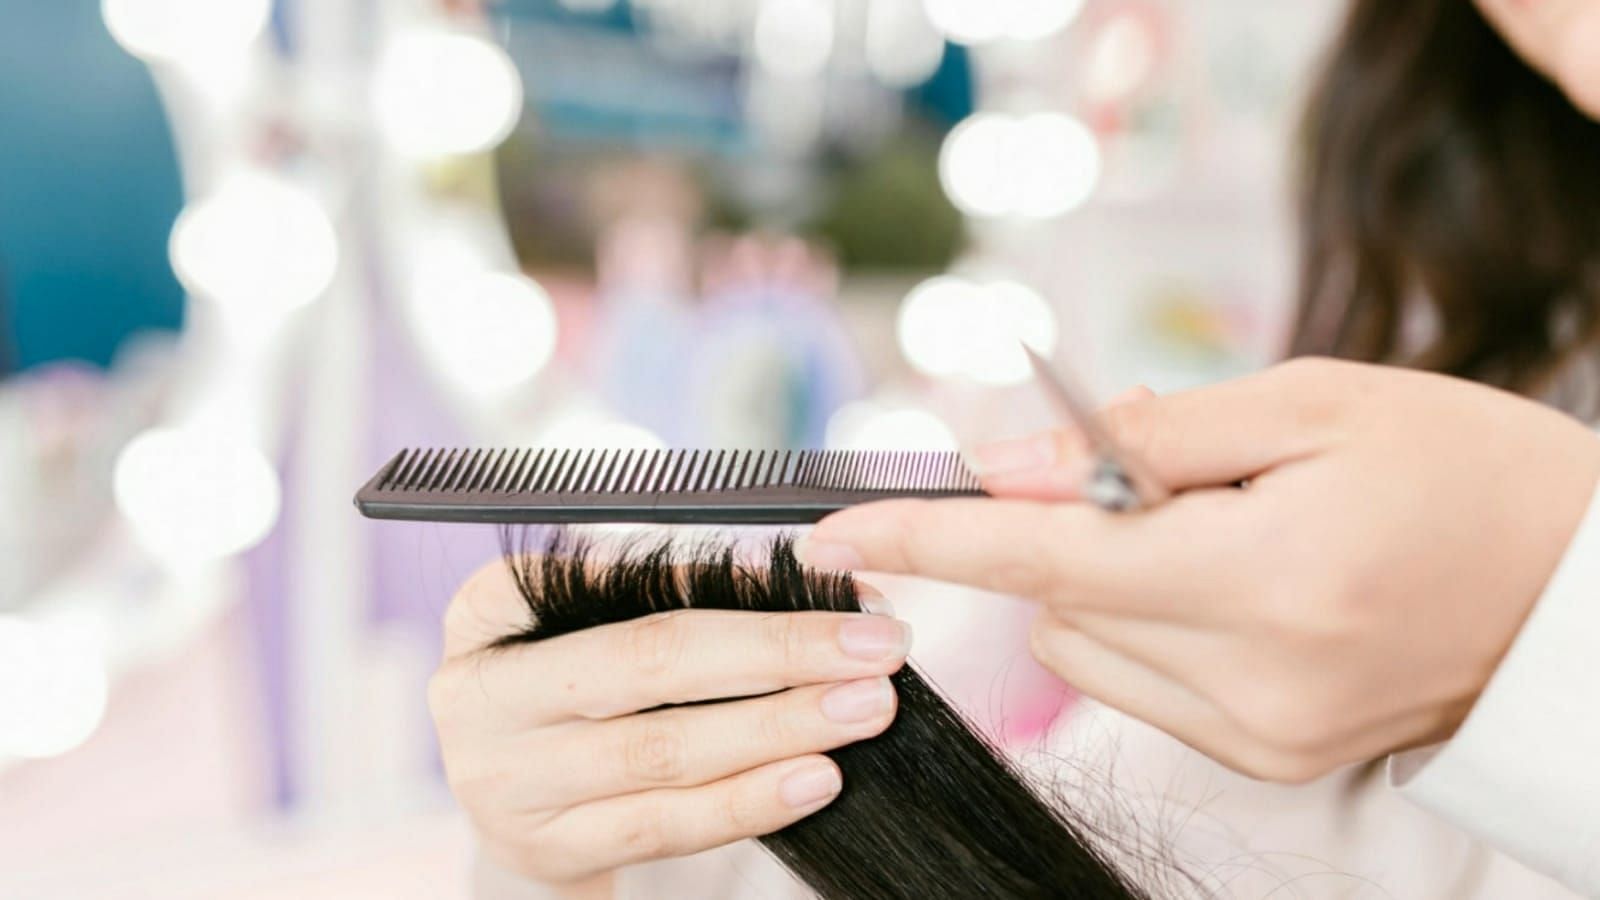 Hairstylist accuses Tyrell Akindolani of running out of salon to avoid paying &quot;time wasting&quot; fee. (Image via Pexels))